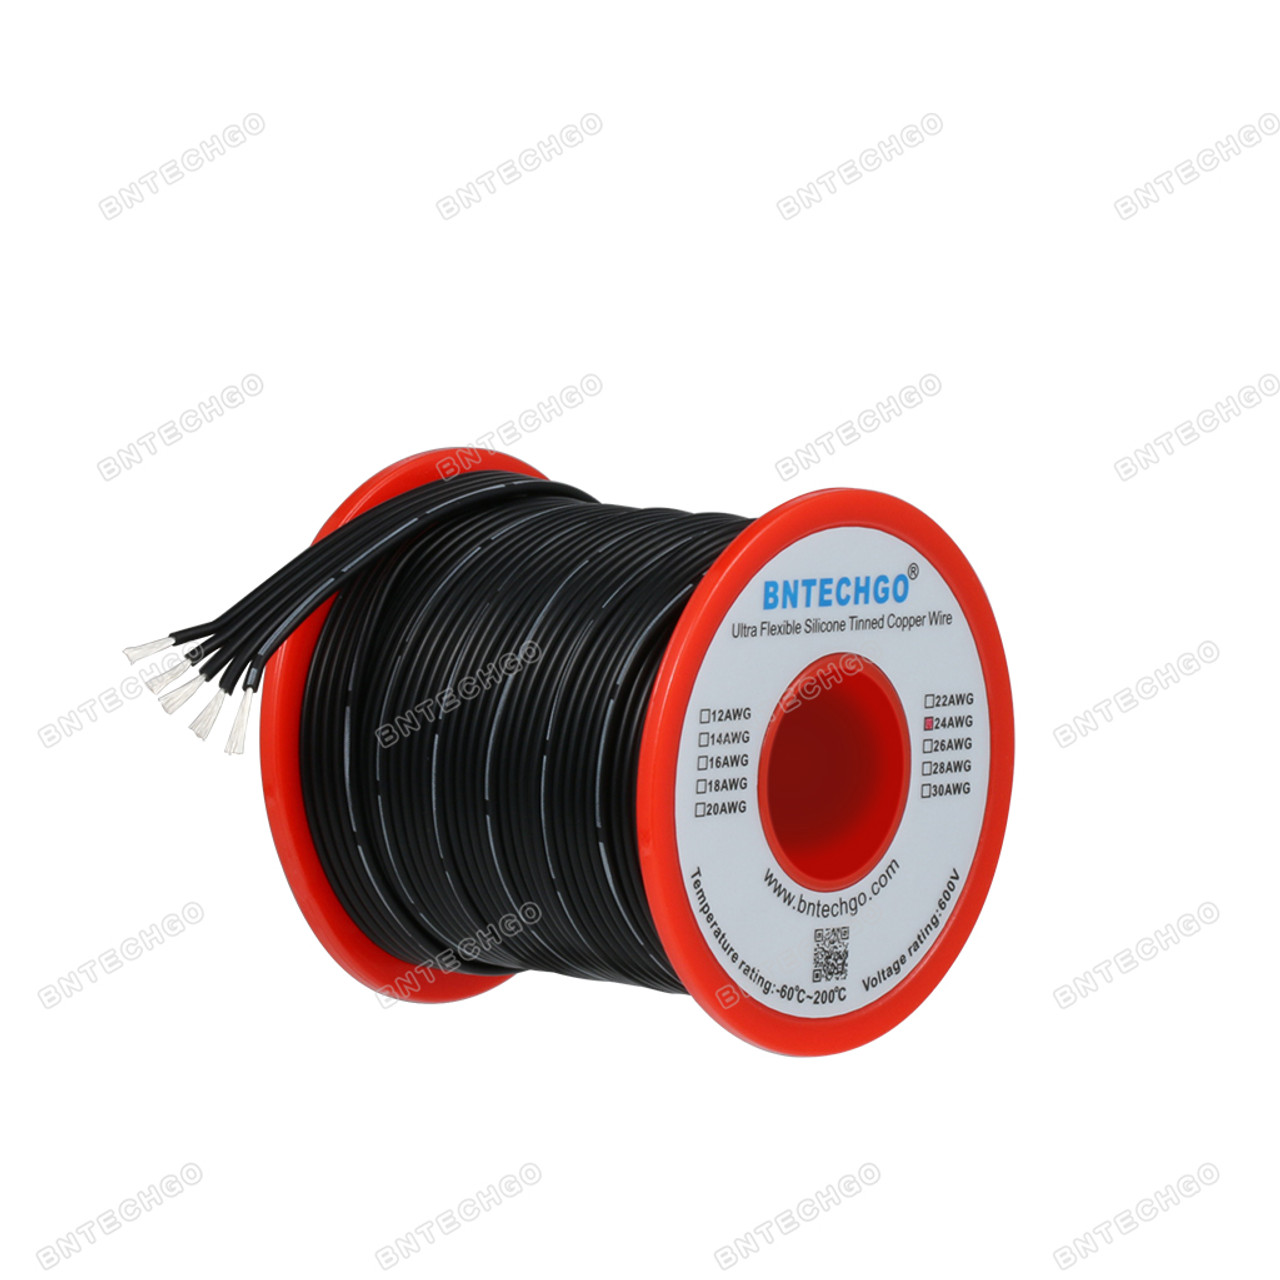 24 Awg Stranded Electrical Wire 24 Gauge Tinned Copper Wires